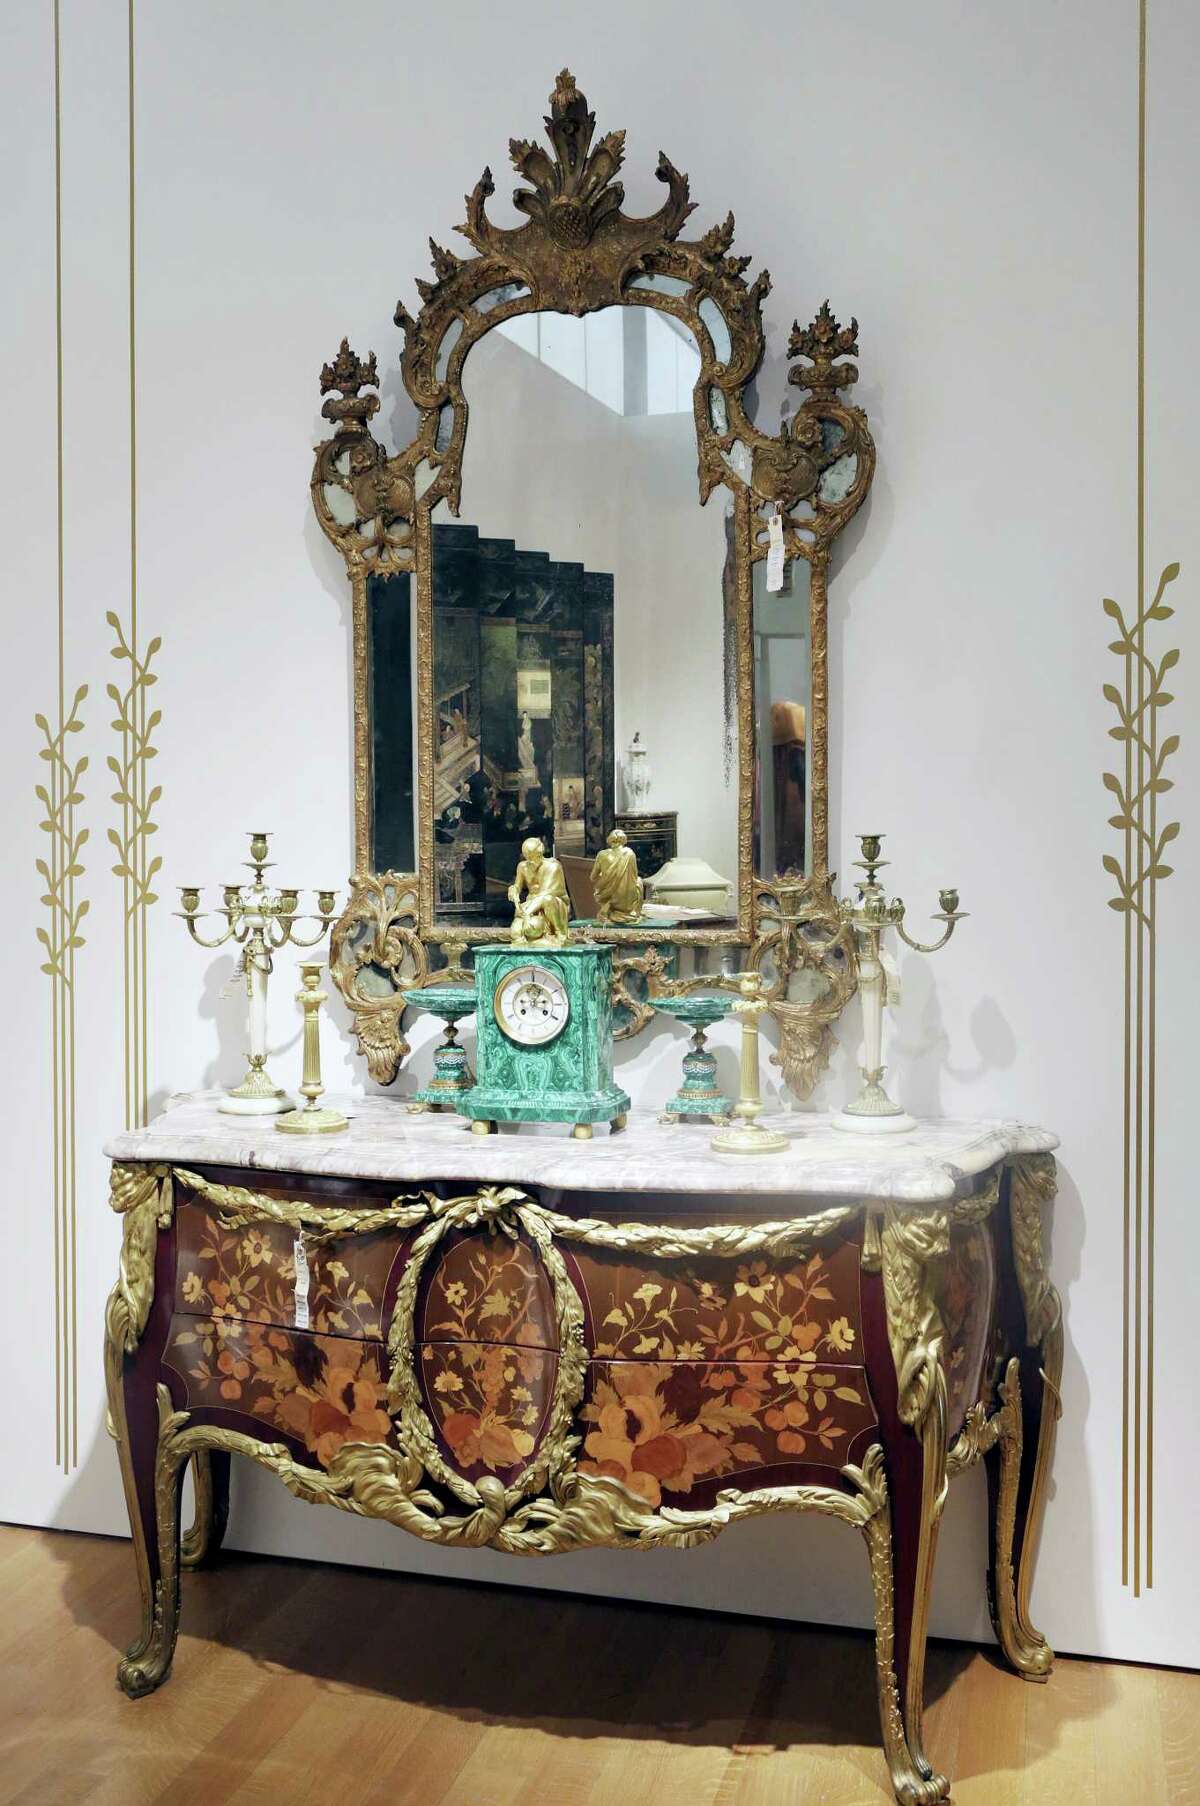 A French chest of drawers, owned by the late comedian Joan Rivers, is displayed at Christie’s, Friday, June 17, 2016, in New York. The Private Collection of Joan Rivers has more than 200 lots to be auctioned in a live sale at Christie’s on June 22 and about 80 more offered online at Christies.com, starting Thursday through June 23.